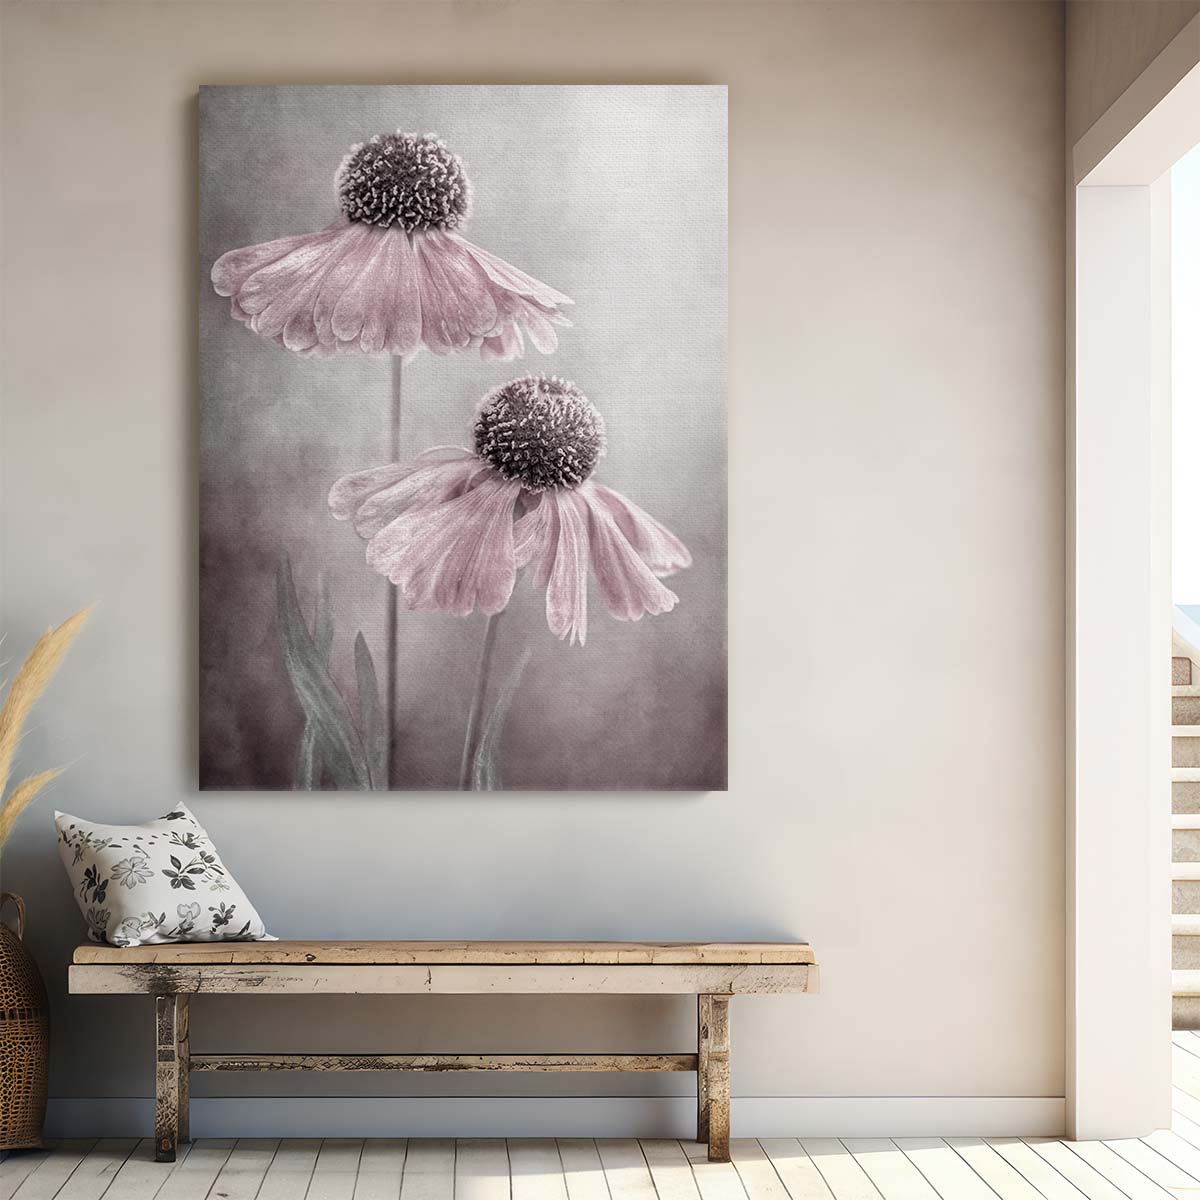 Botanical Floral Photography Pink Helenium Sneezeweed Duo Art by Luxuriance Designs, made in USA